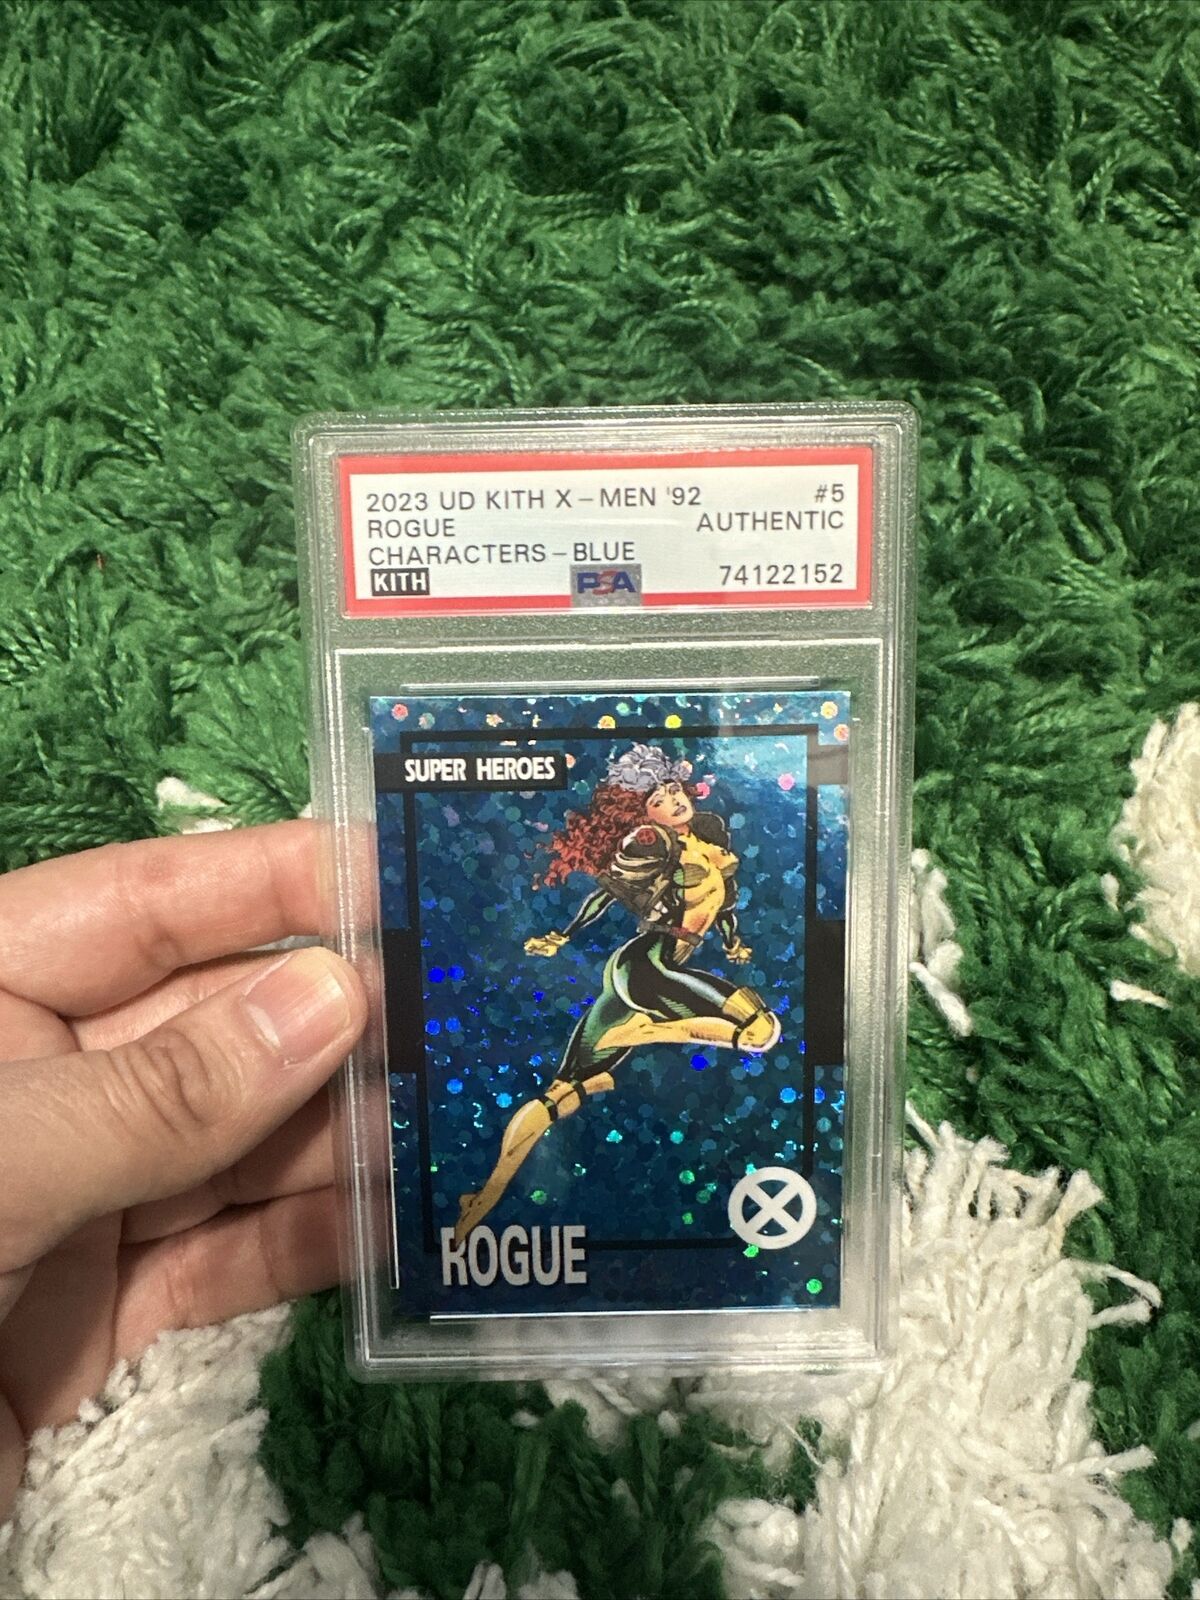 2023 UD Kith x Asics X- Men 92 Rogue Blue #5 PSA Graded Card 1 Of 50